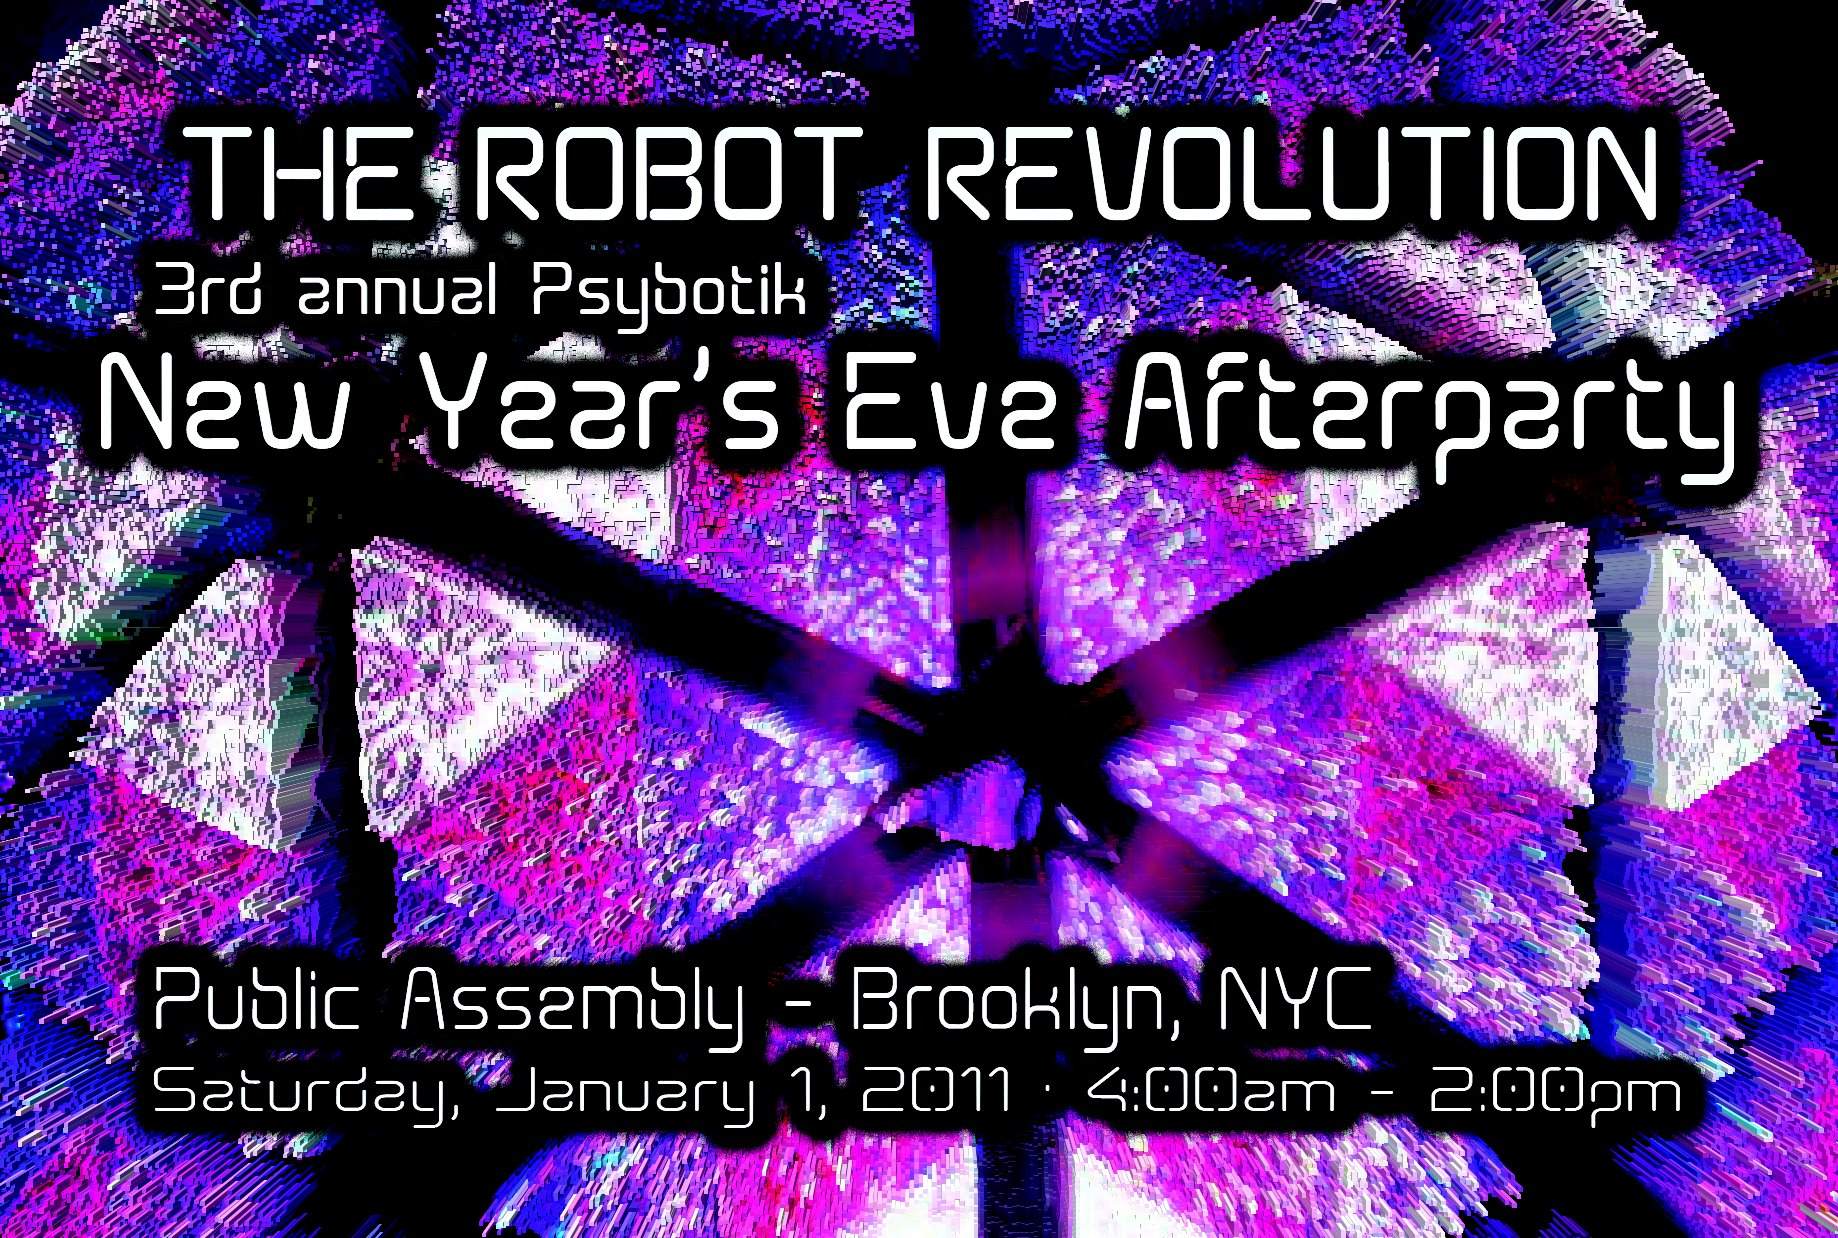 The Robot Revolution - 3rd Annual Psybotik New Year's Eve Afterparty - フライヤー表